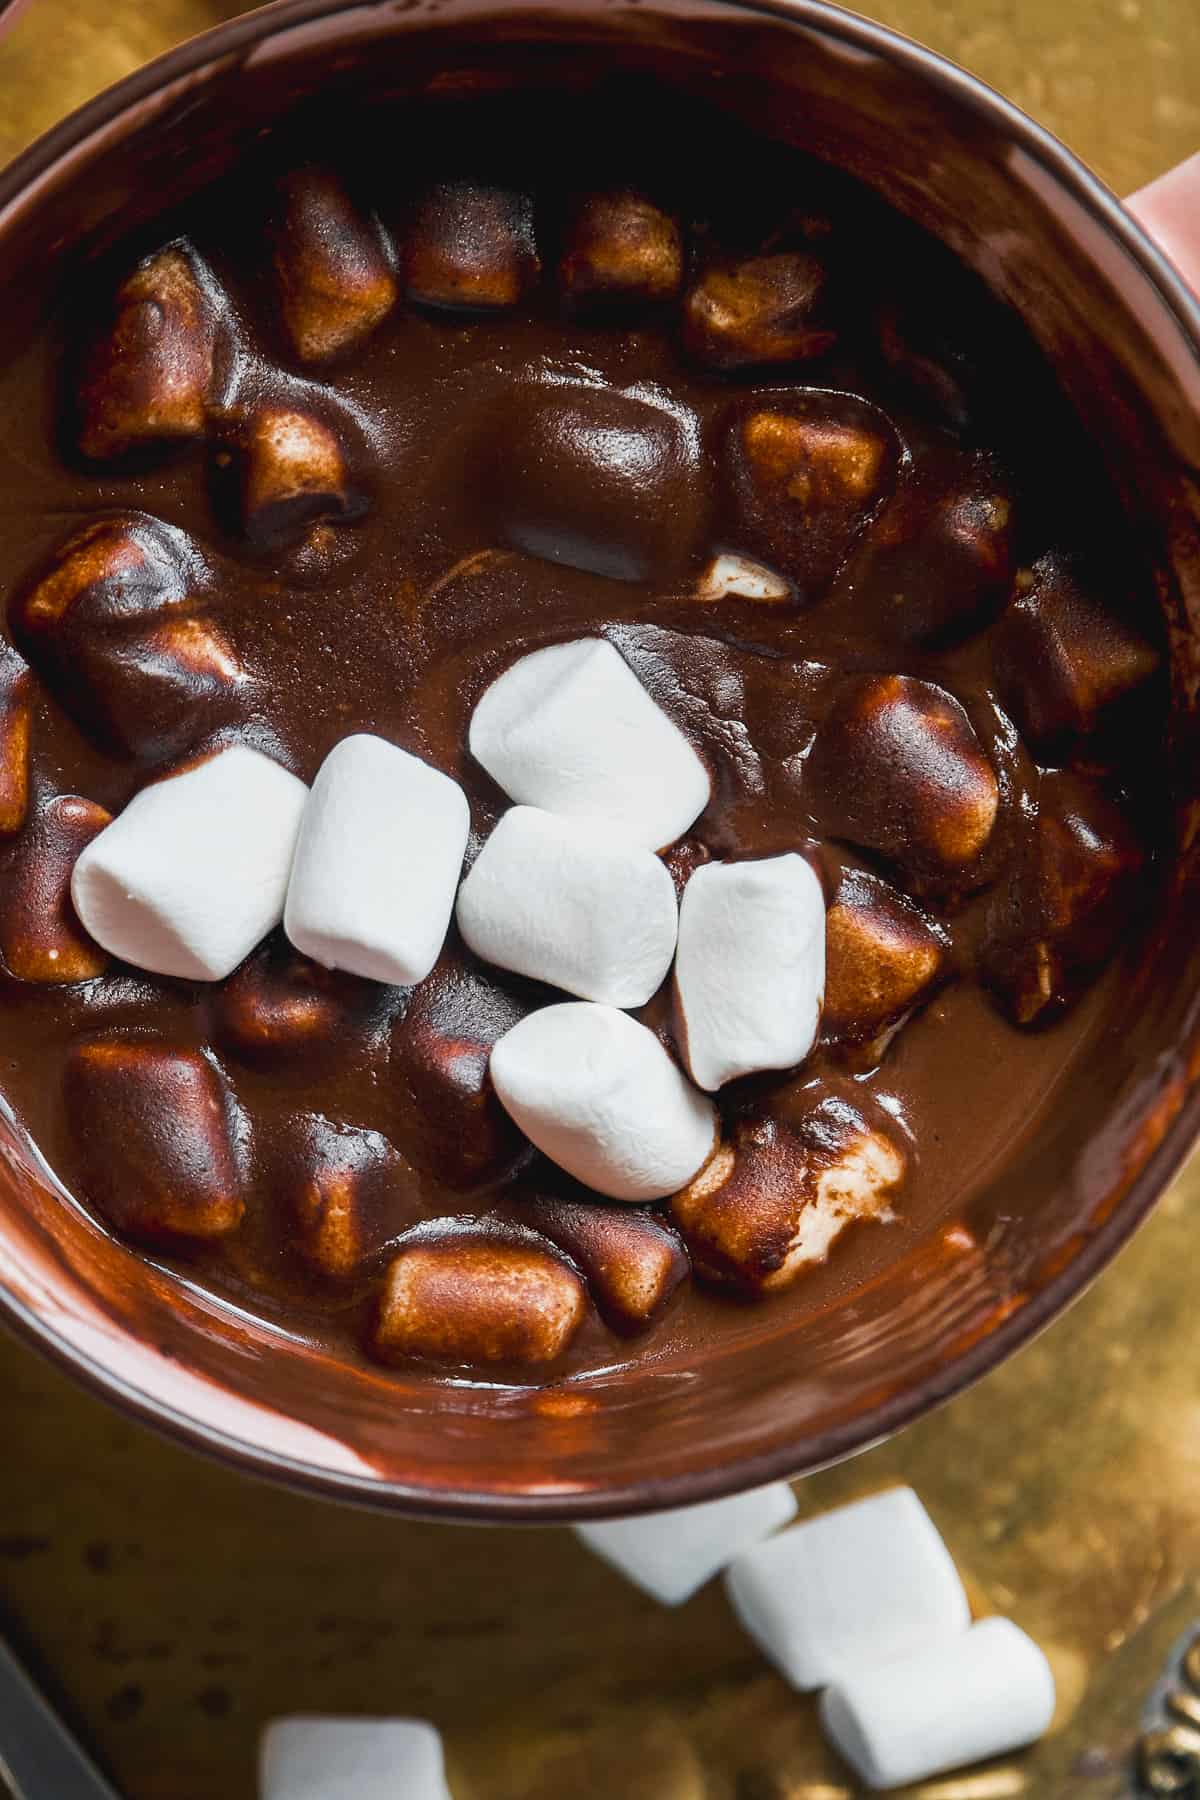 Hot chocolate with dairy free milk in a mug with marshmallows on top.